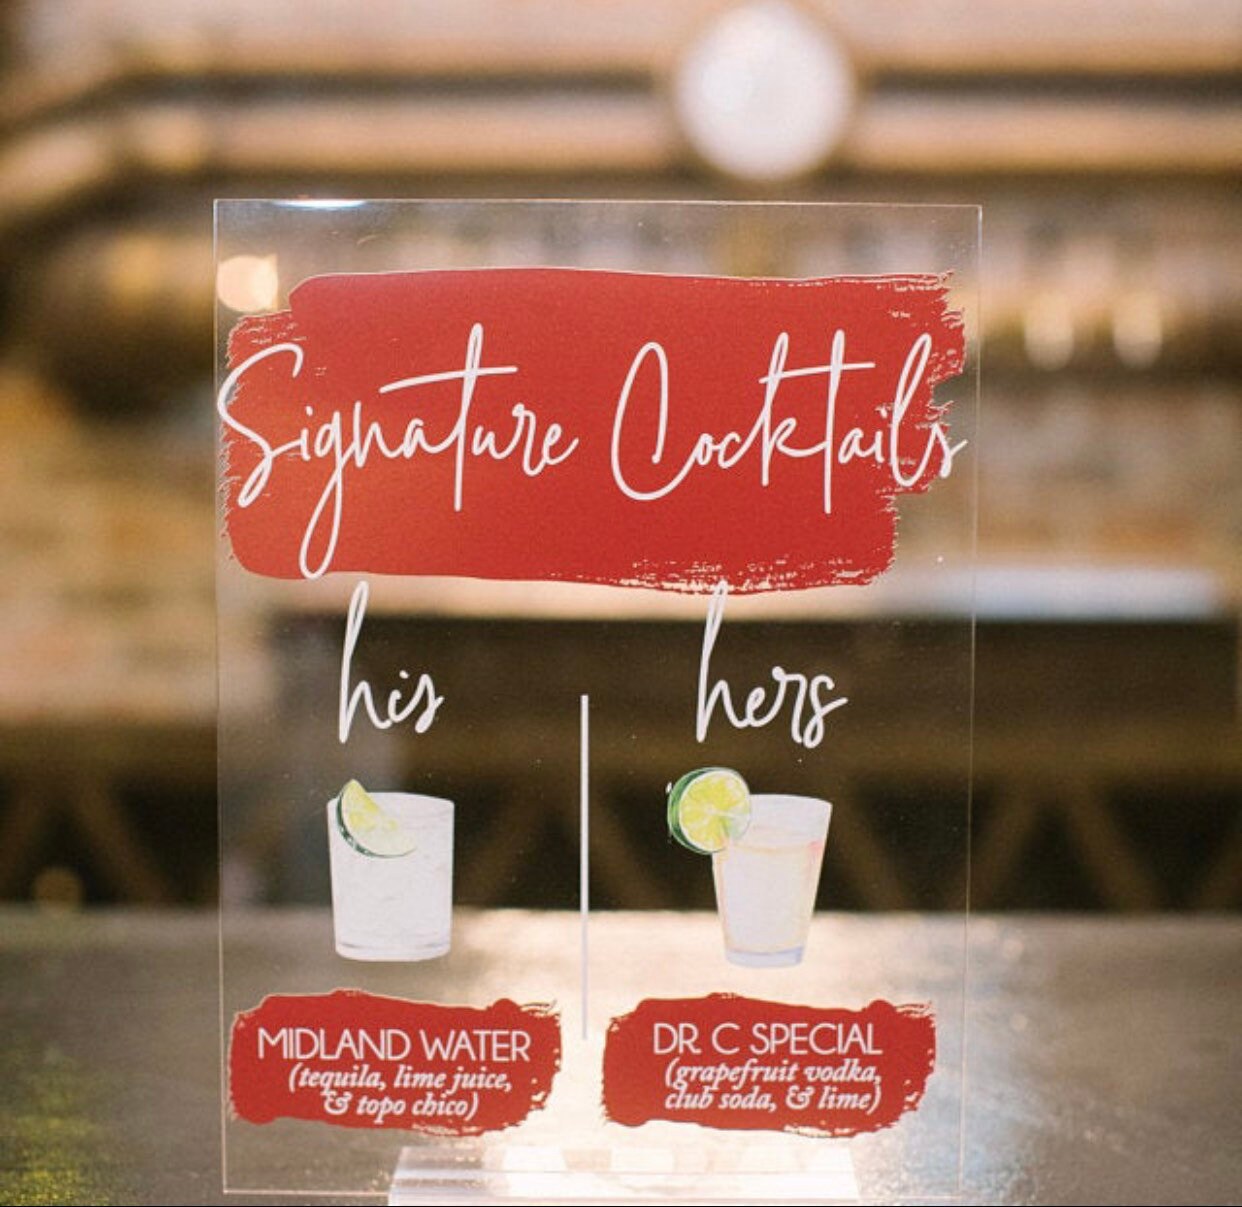 Signature Cocktails Personalized Drink Sign With Colored Backsplash S3-DS3